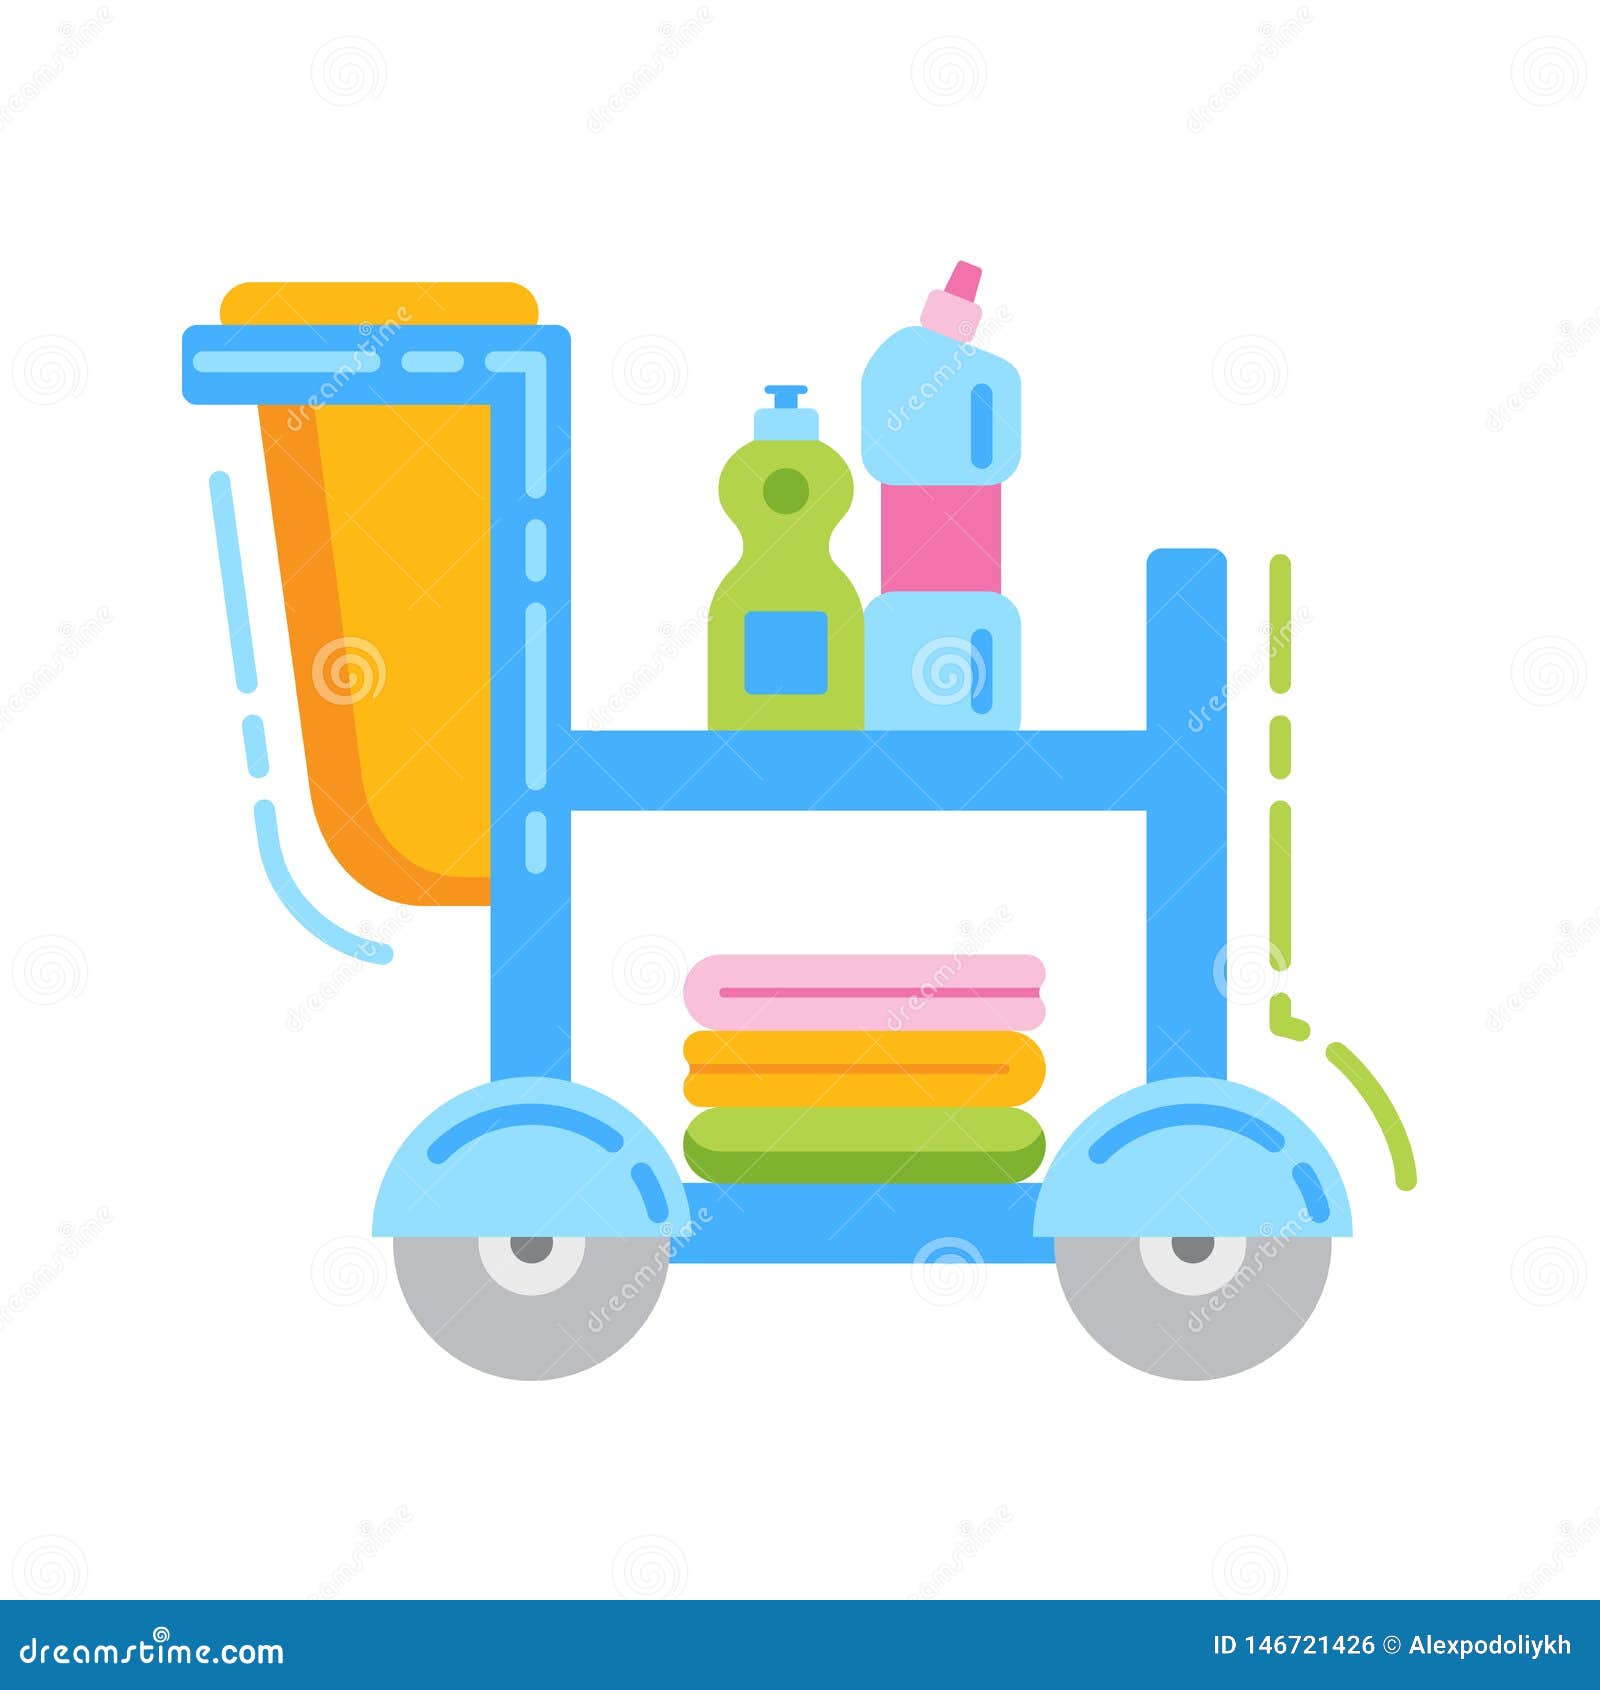 Color : Blue GR/Commercial Cleaning Trolley with Lid Hotel Housekeeping Service Mobile Pushing Cart Portable cart